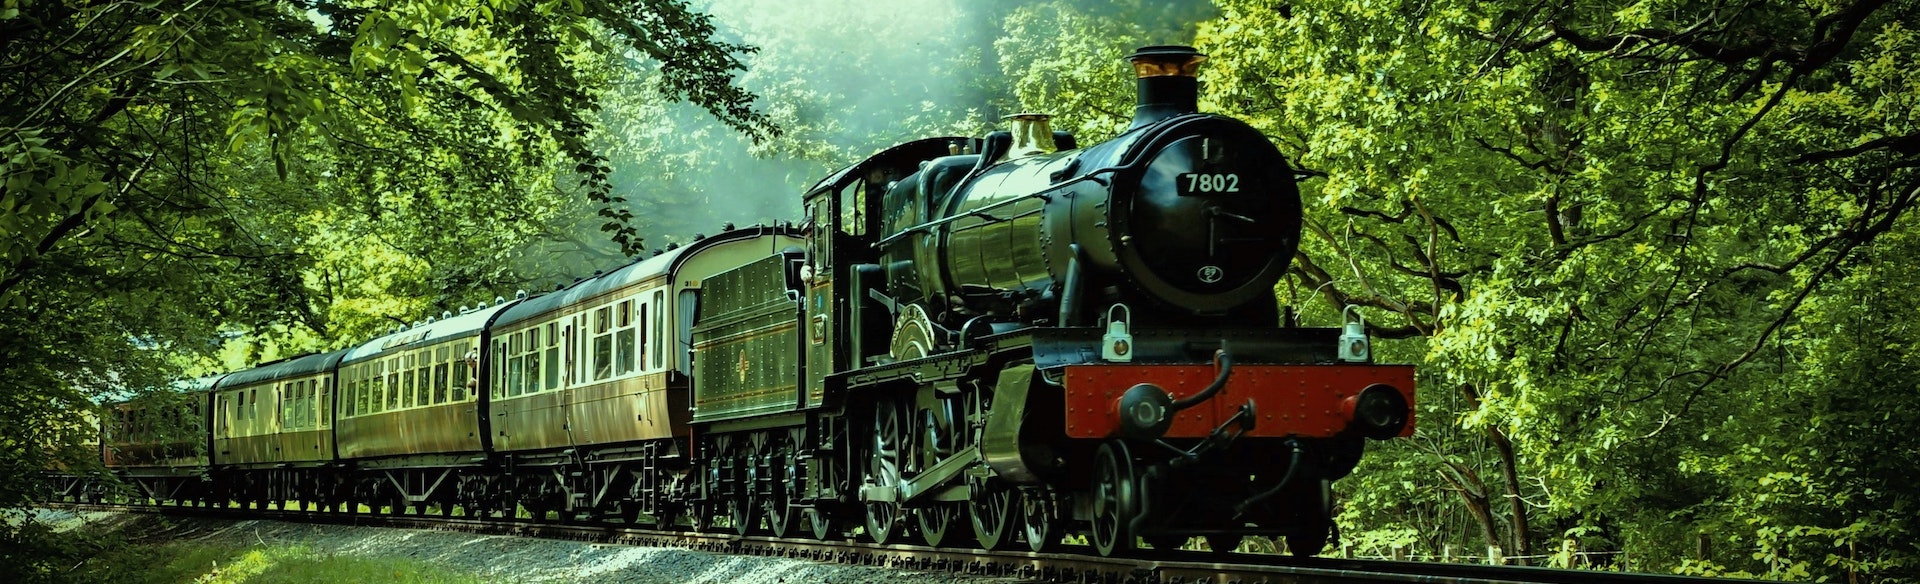 a vintage train driving along a track through a lush green forest